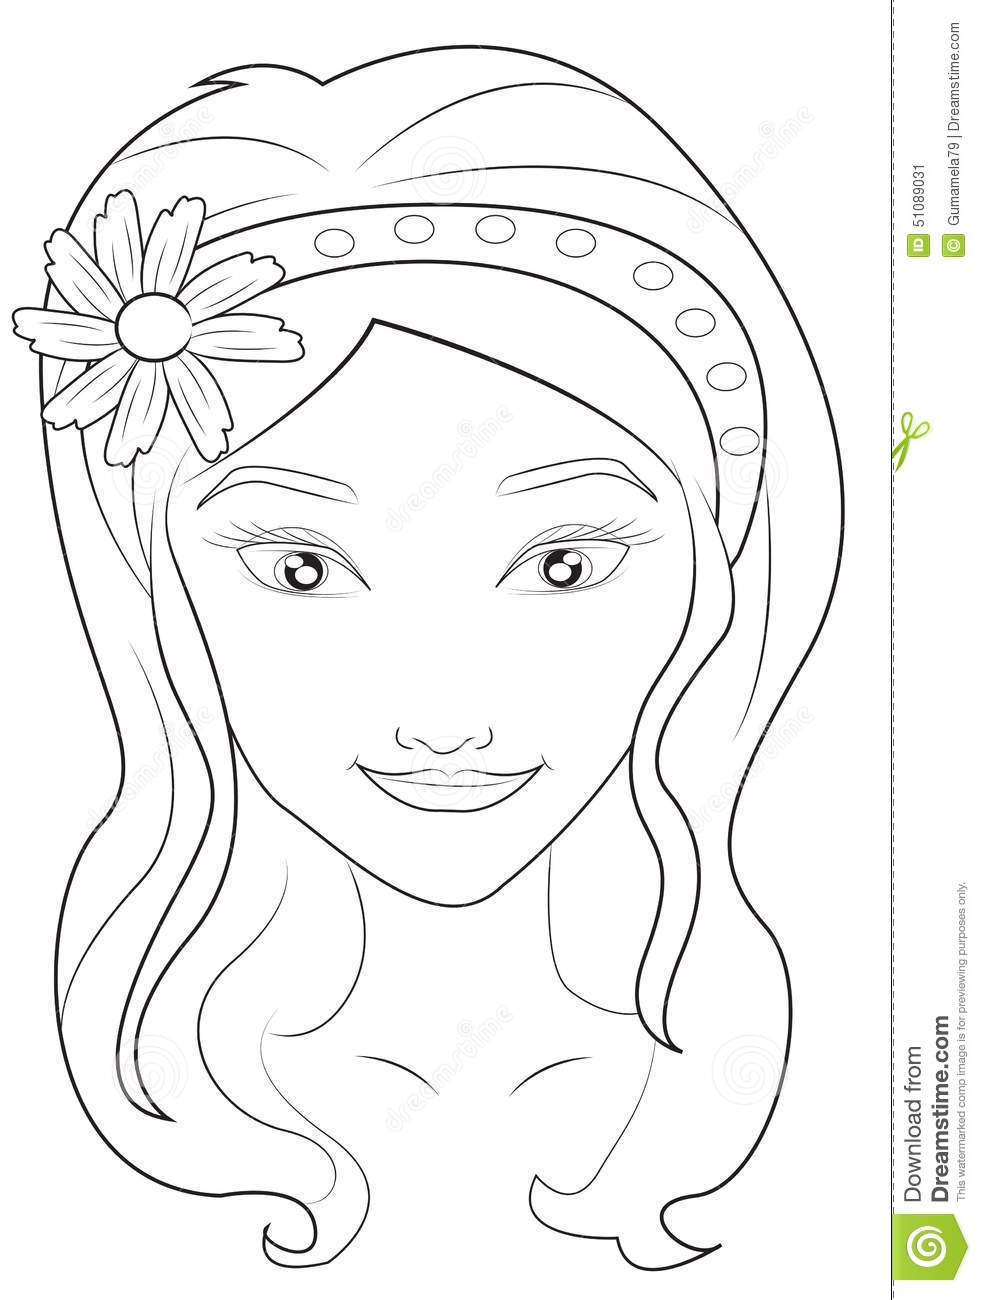 Pretty Faces Coloring Pages Coloring Pages